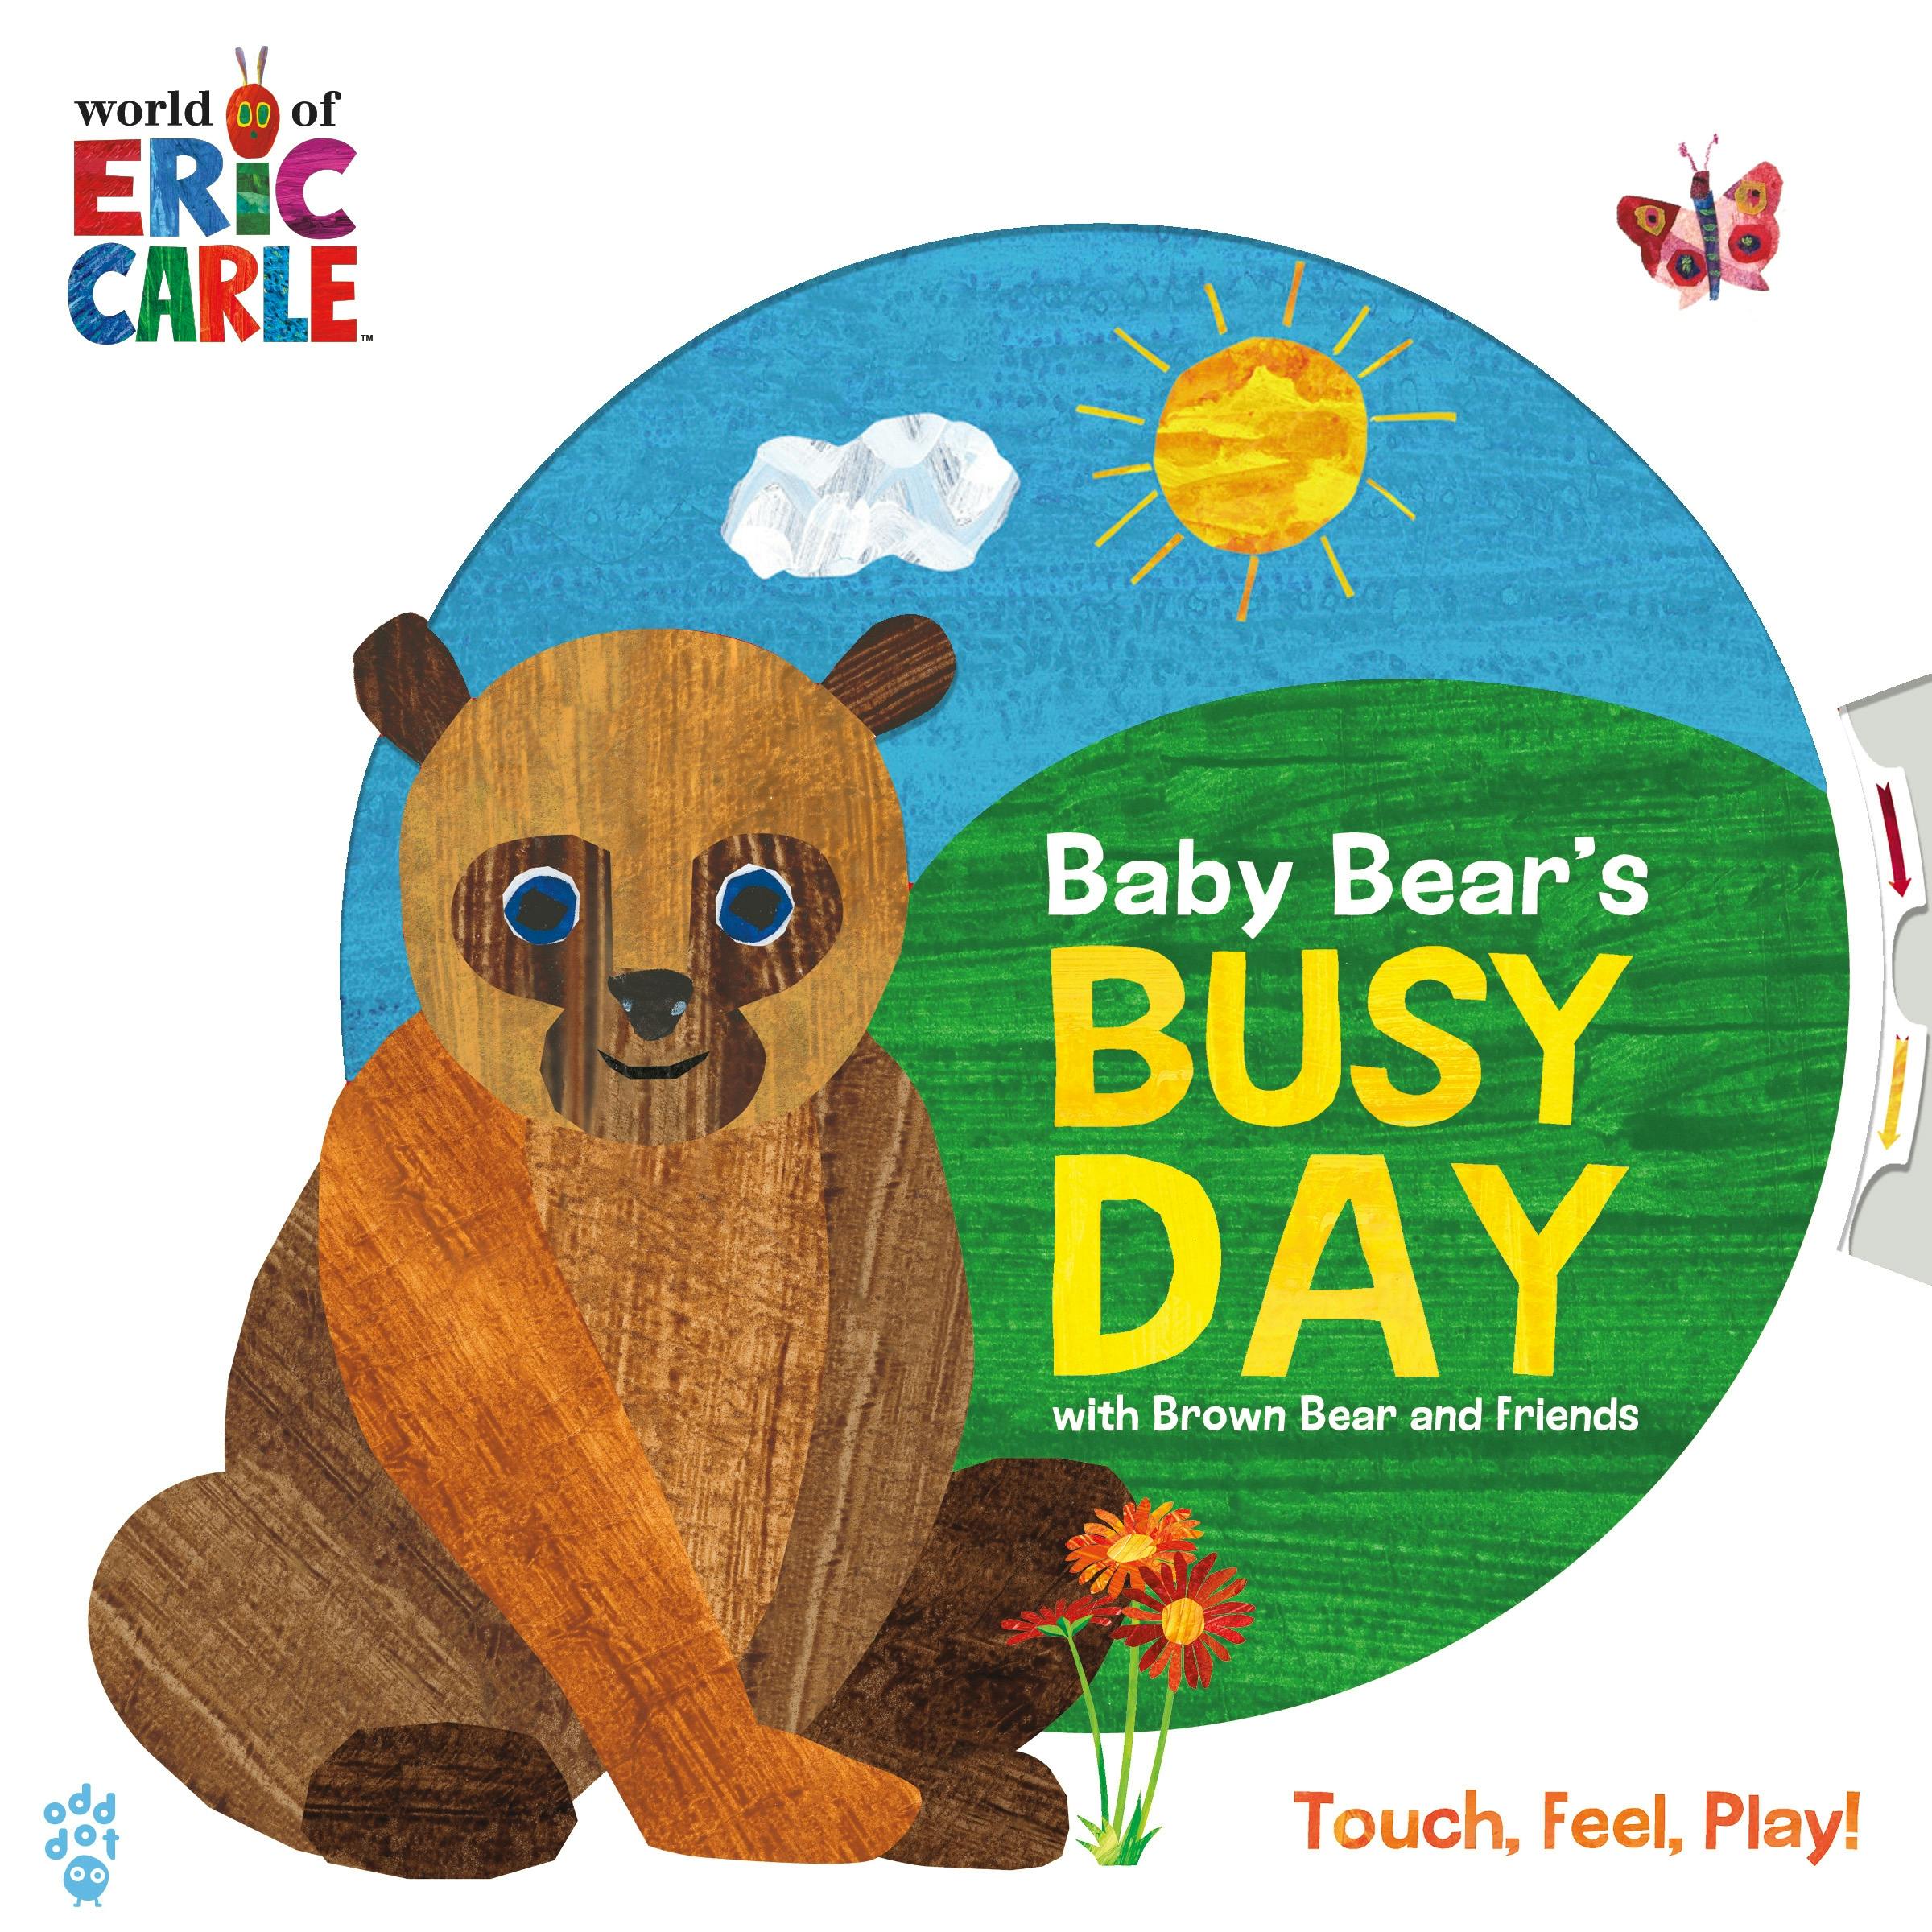 Image of Baby Bear's Busy Day with Brown Bear and Friends (World of Eric Carle)